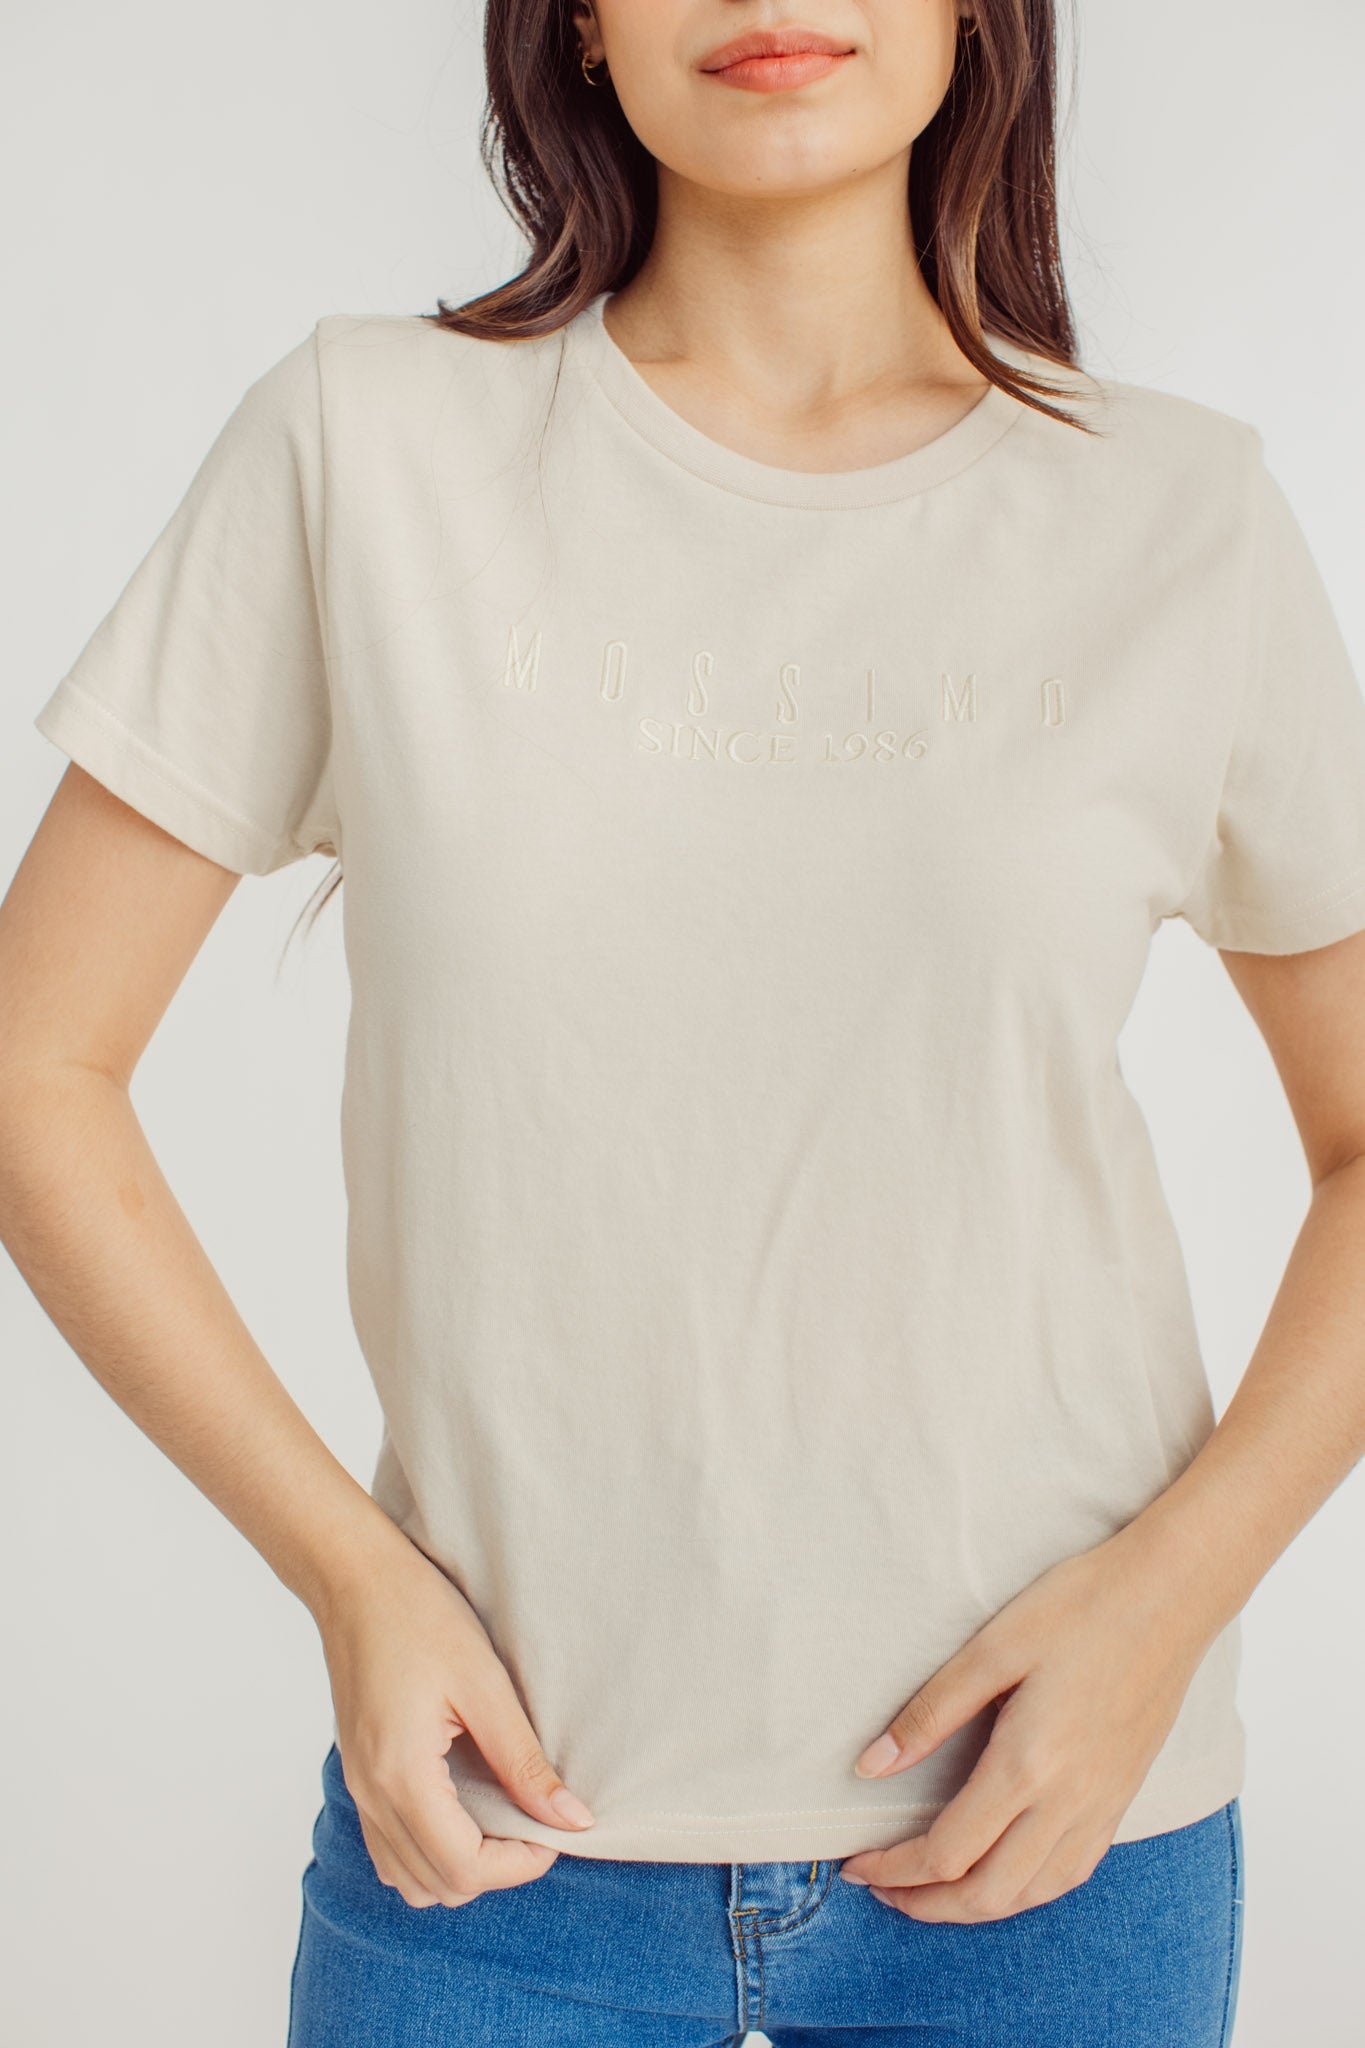 Oatmeal with Mossimo Since 1986 Embroidery Classic Fit Tee - Mossimo PH